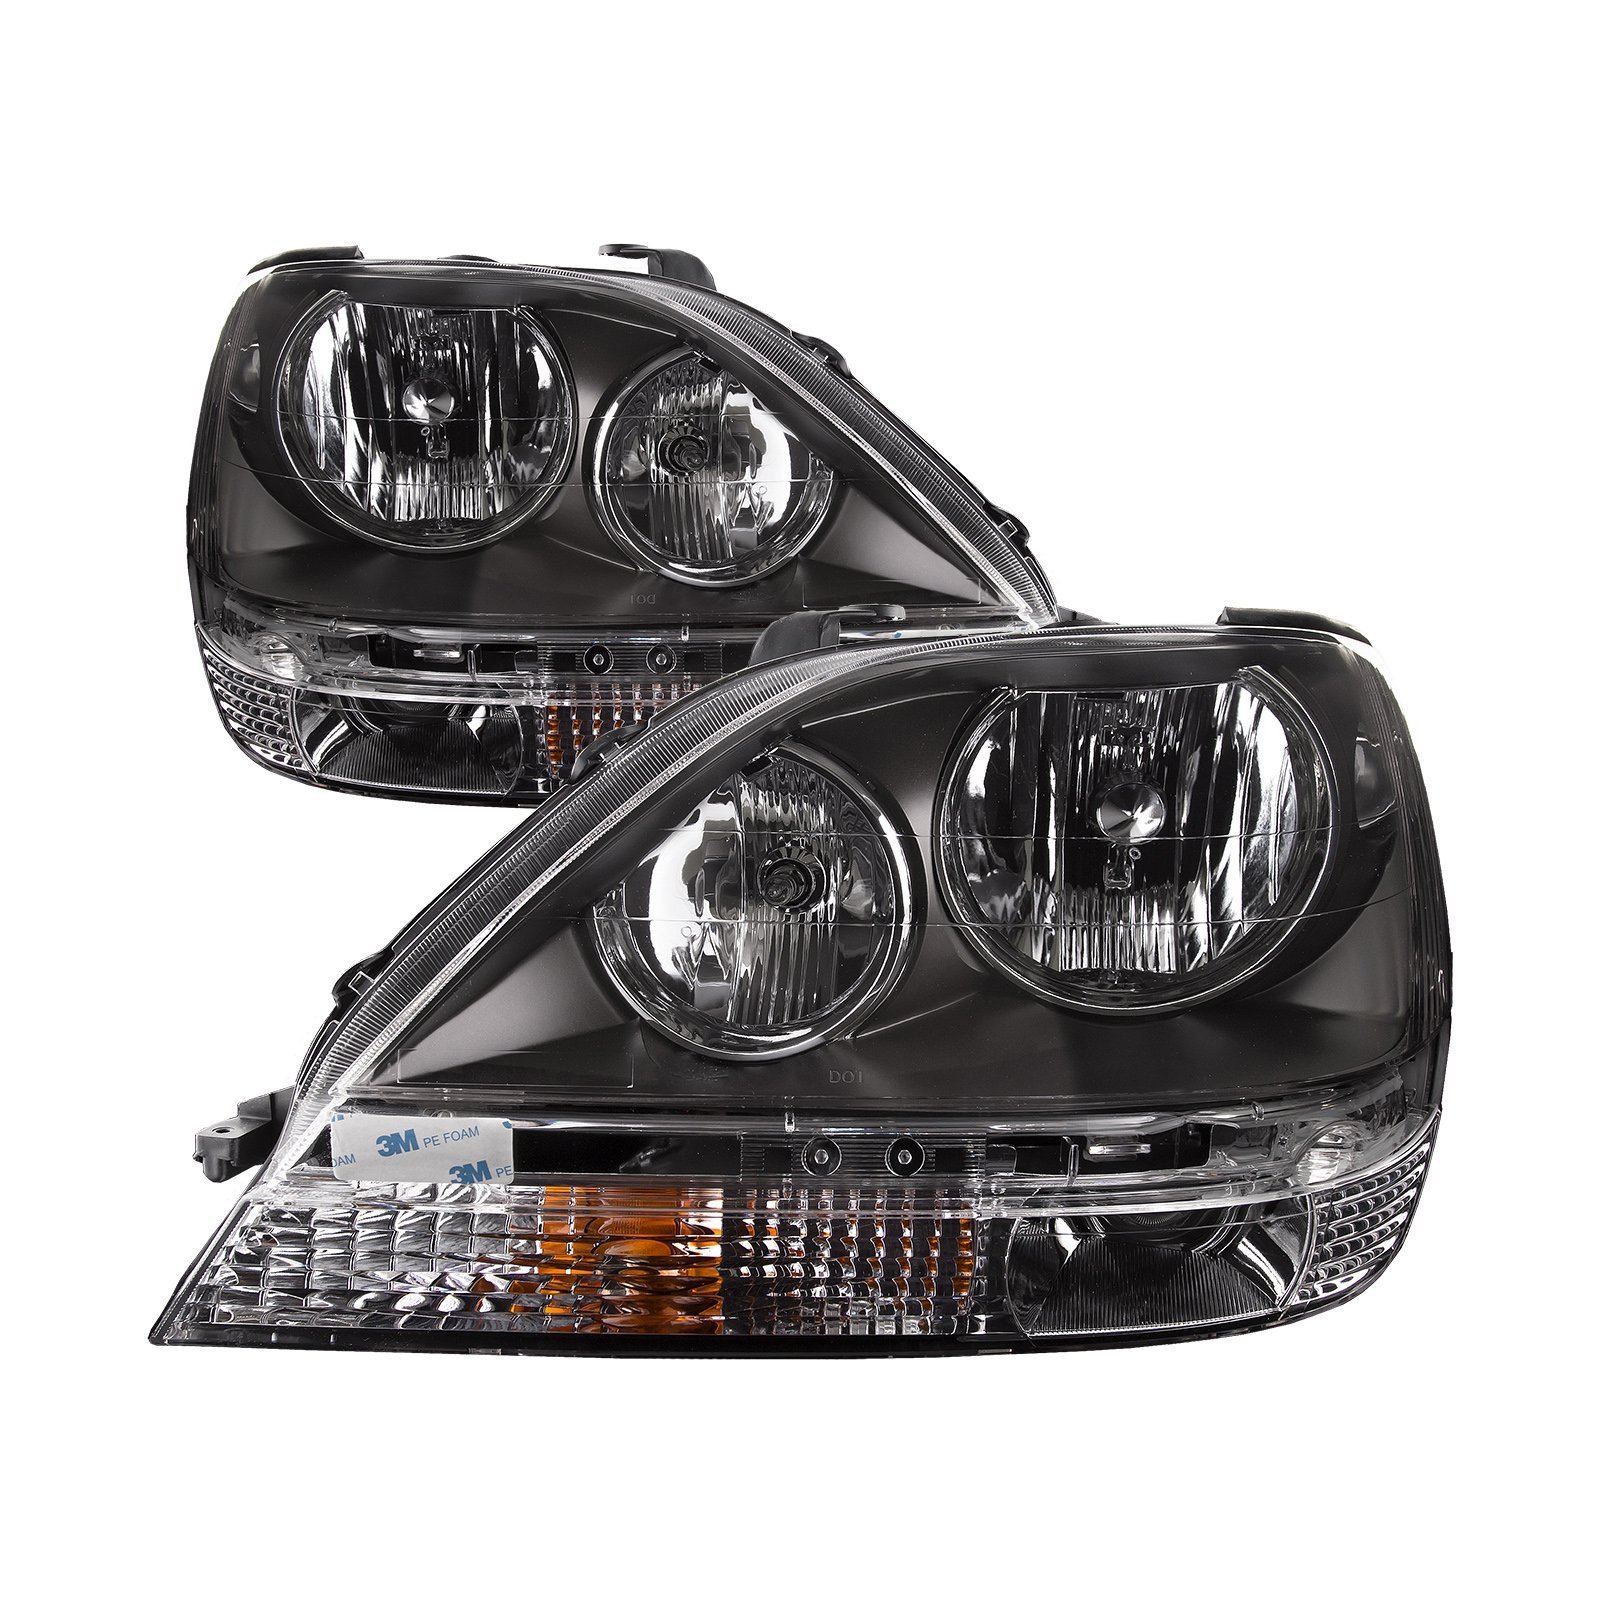 Details about   COACHMEN SPORTSCOACH CROSS COUNTRY 2013 2014 2015 HEADLIGHTS HEAD LAMPS PAIR RV 